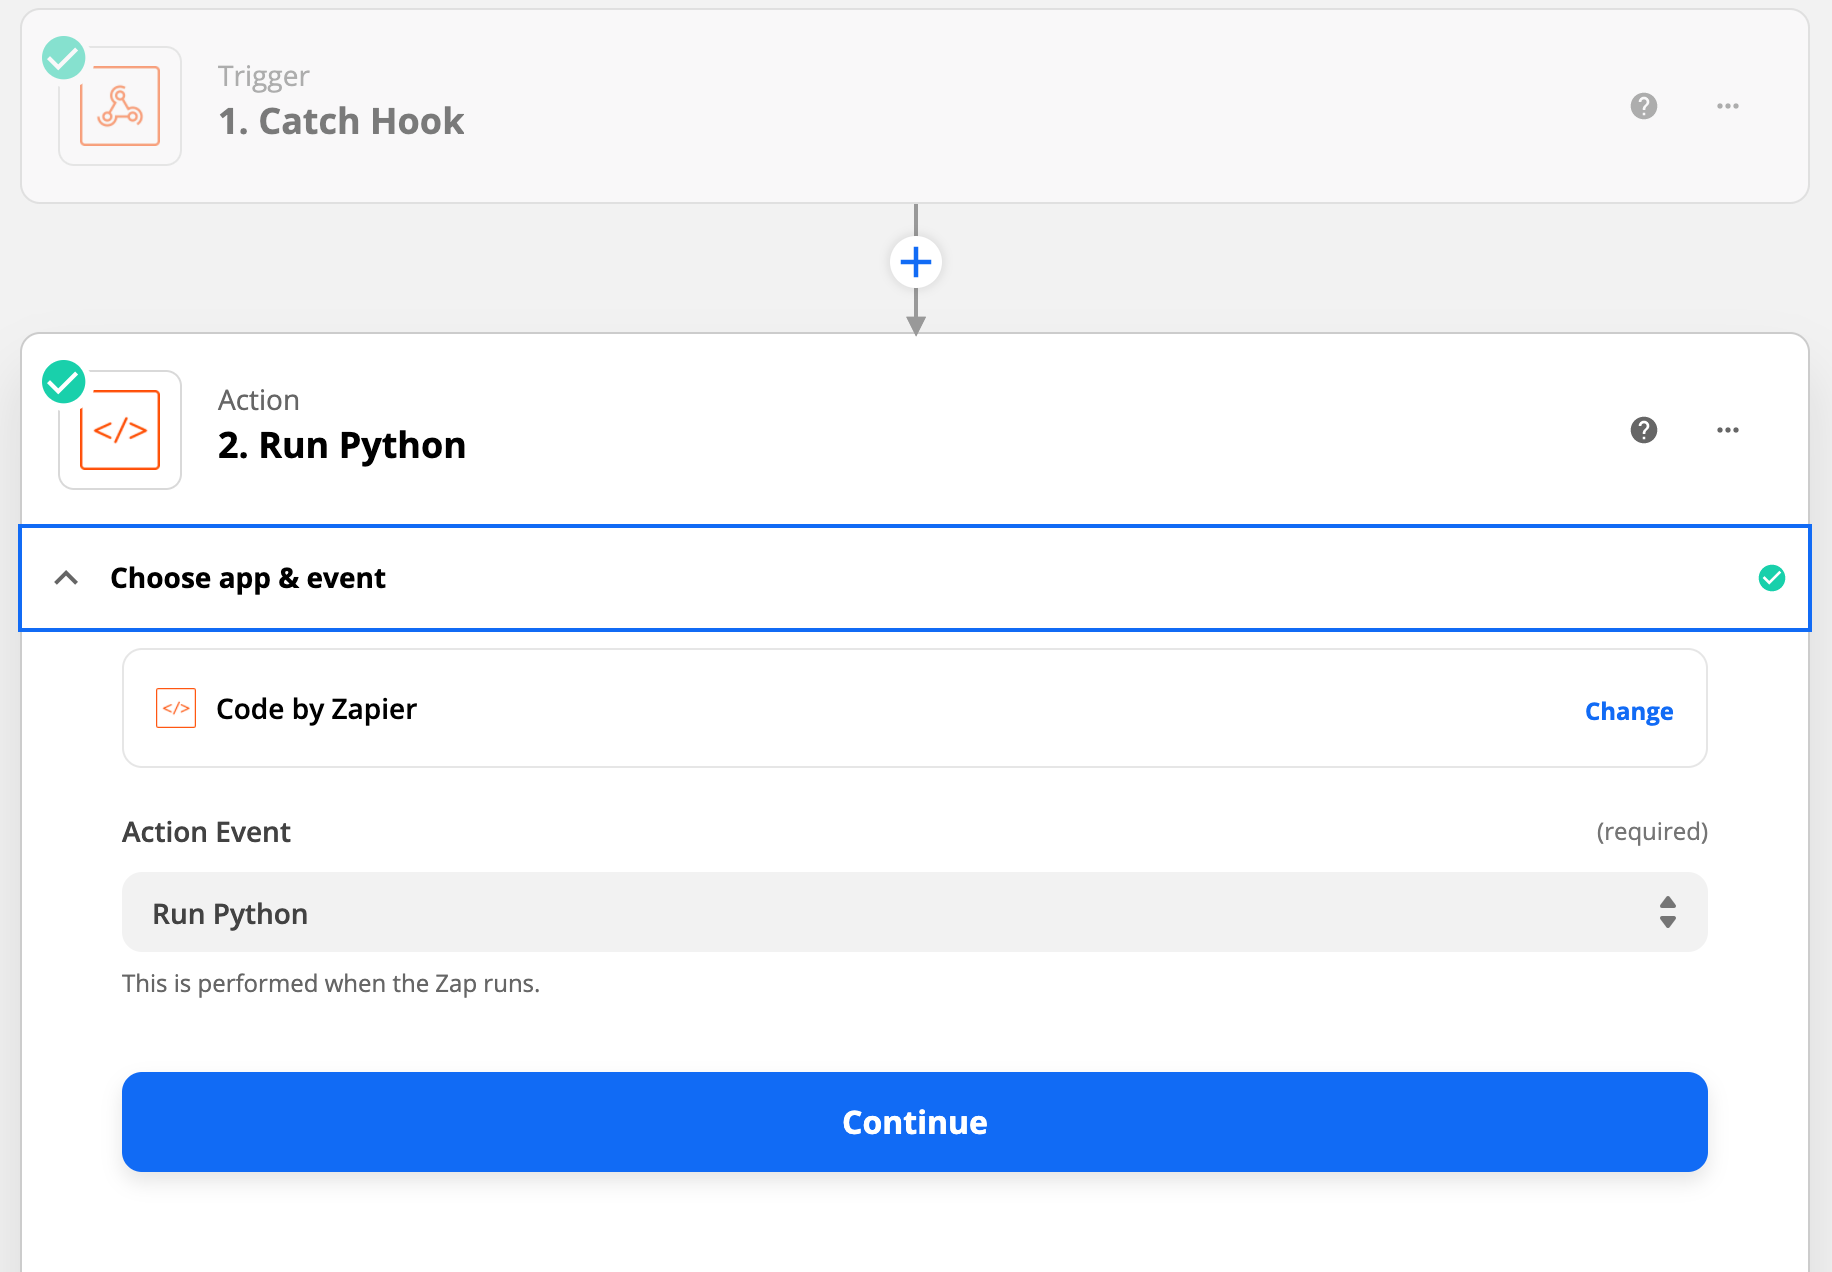 The Run Python Action Event is selected, and the blue Continue button is displayed in the Zapier webhook setup